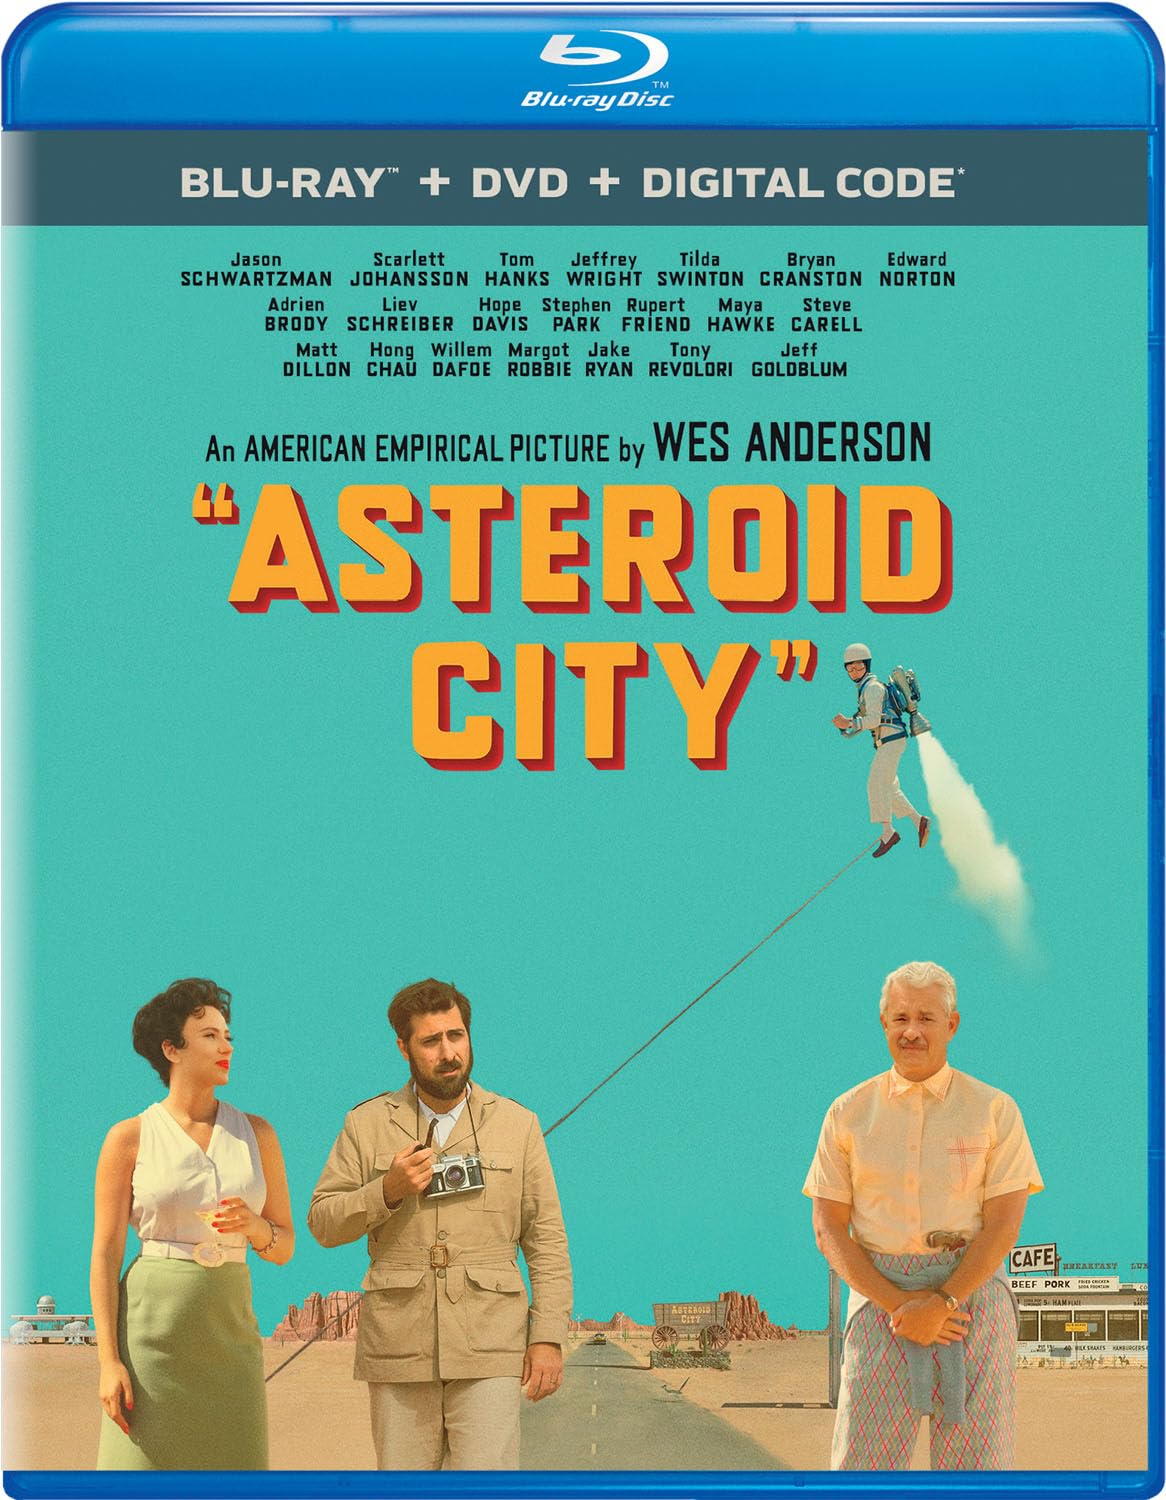 Asteroid City HD Digital Code (Movies Anywhere)